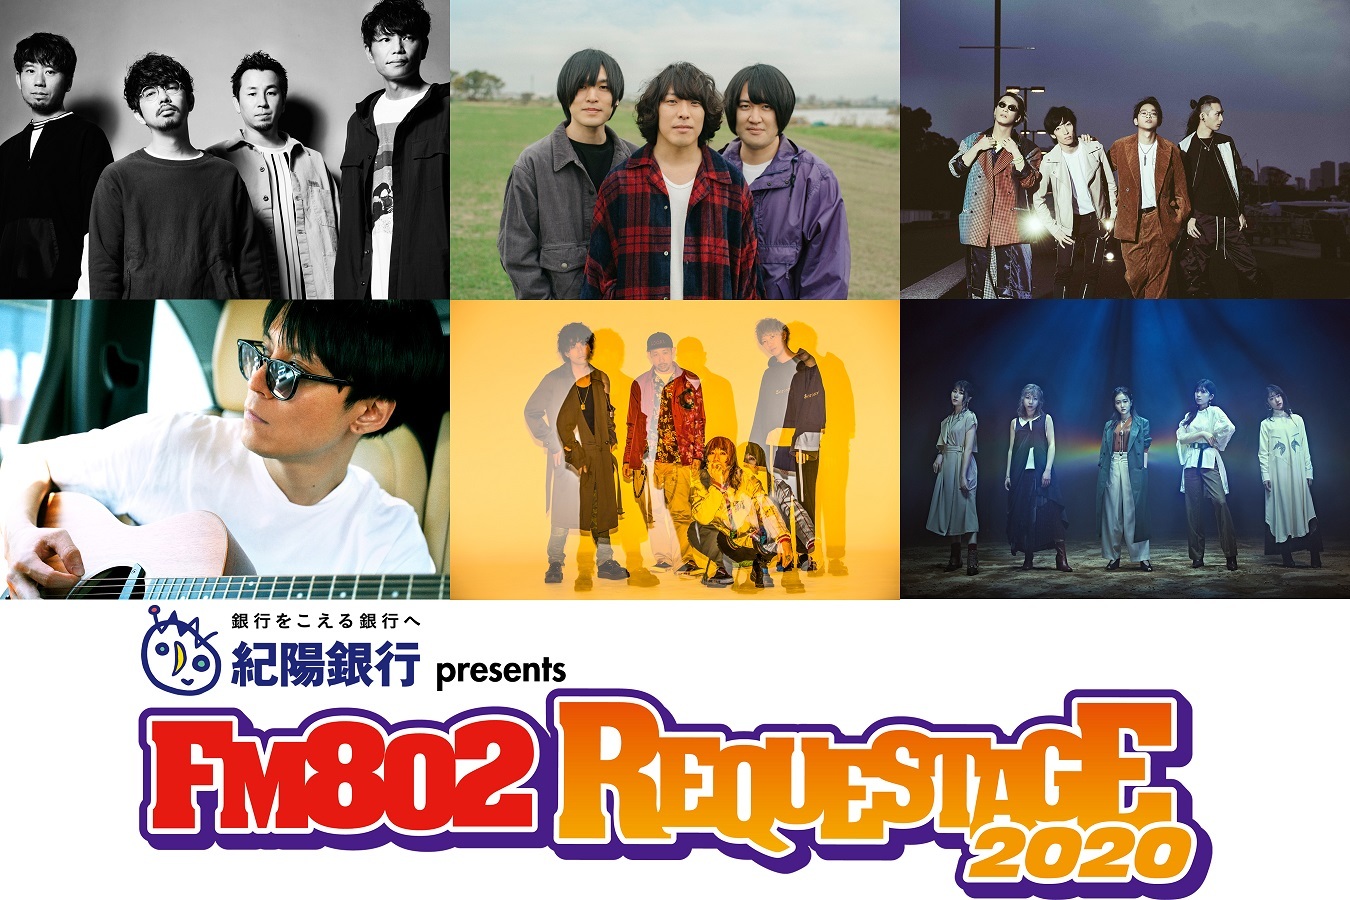 『FM802 SPECIAL LIVE 紀陽銀行 presents REQUESTAGE 2020』